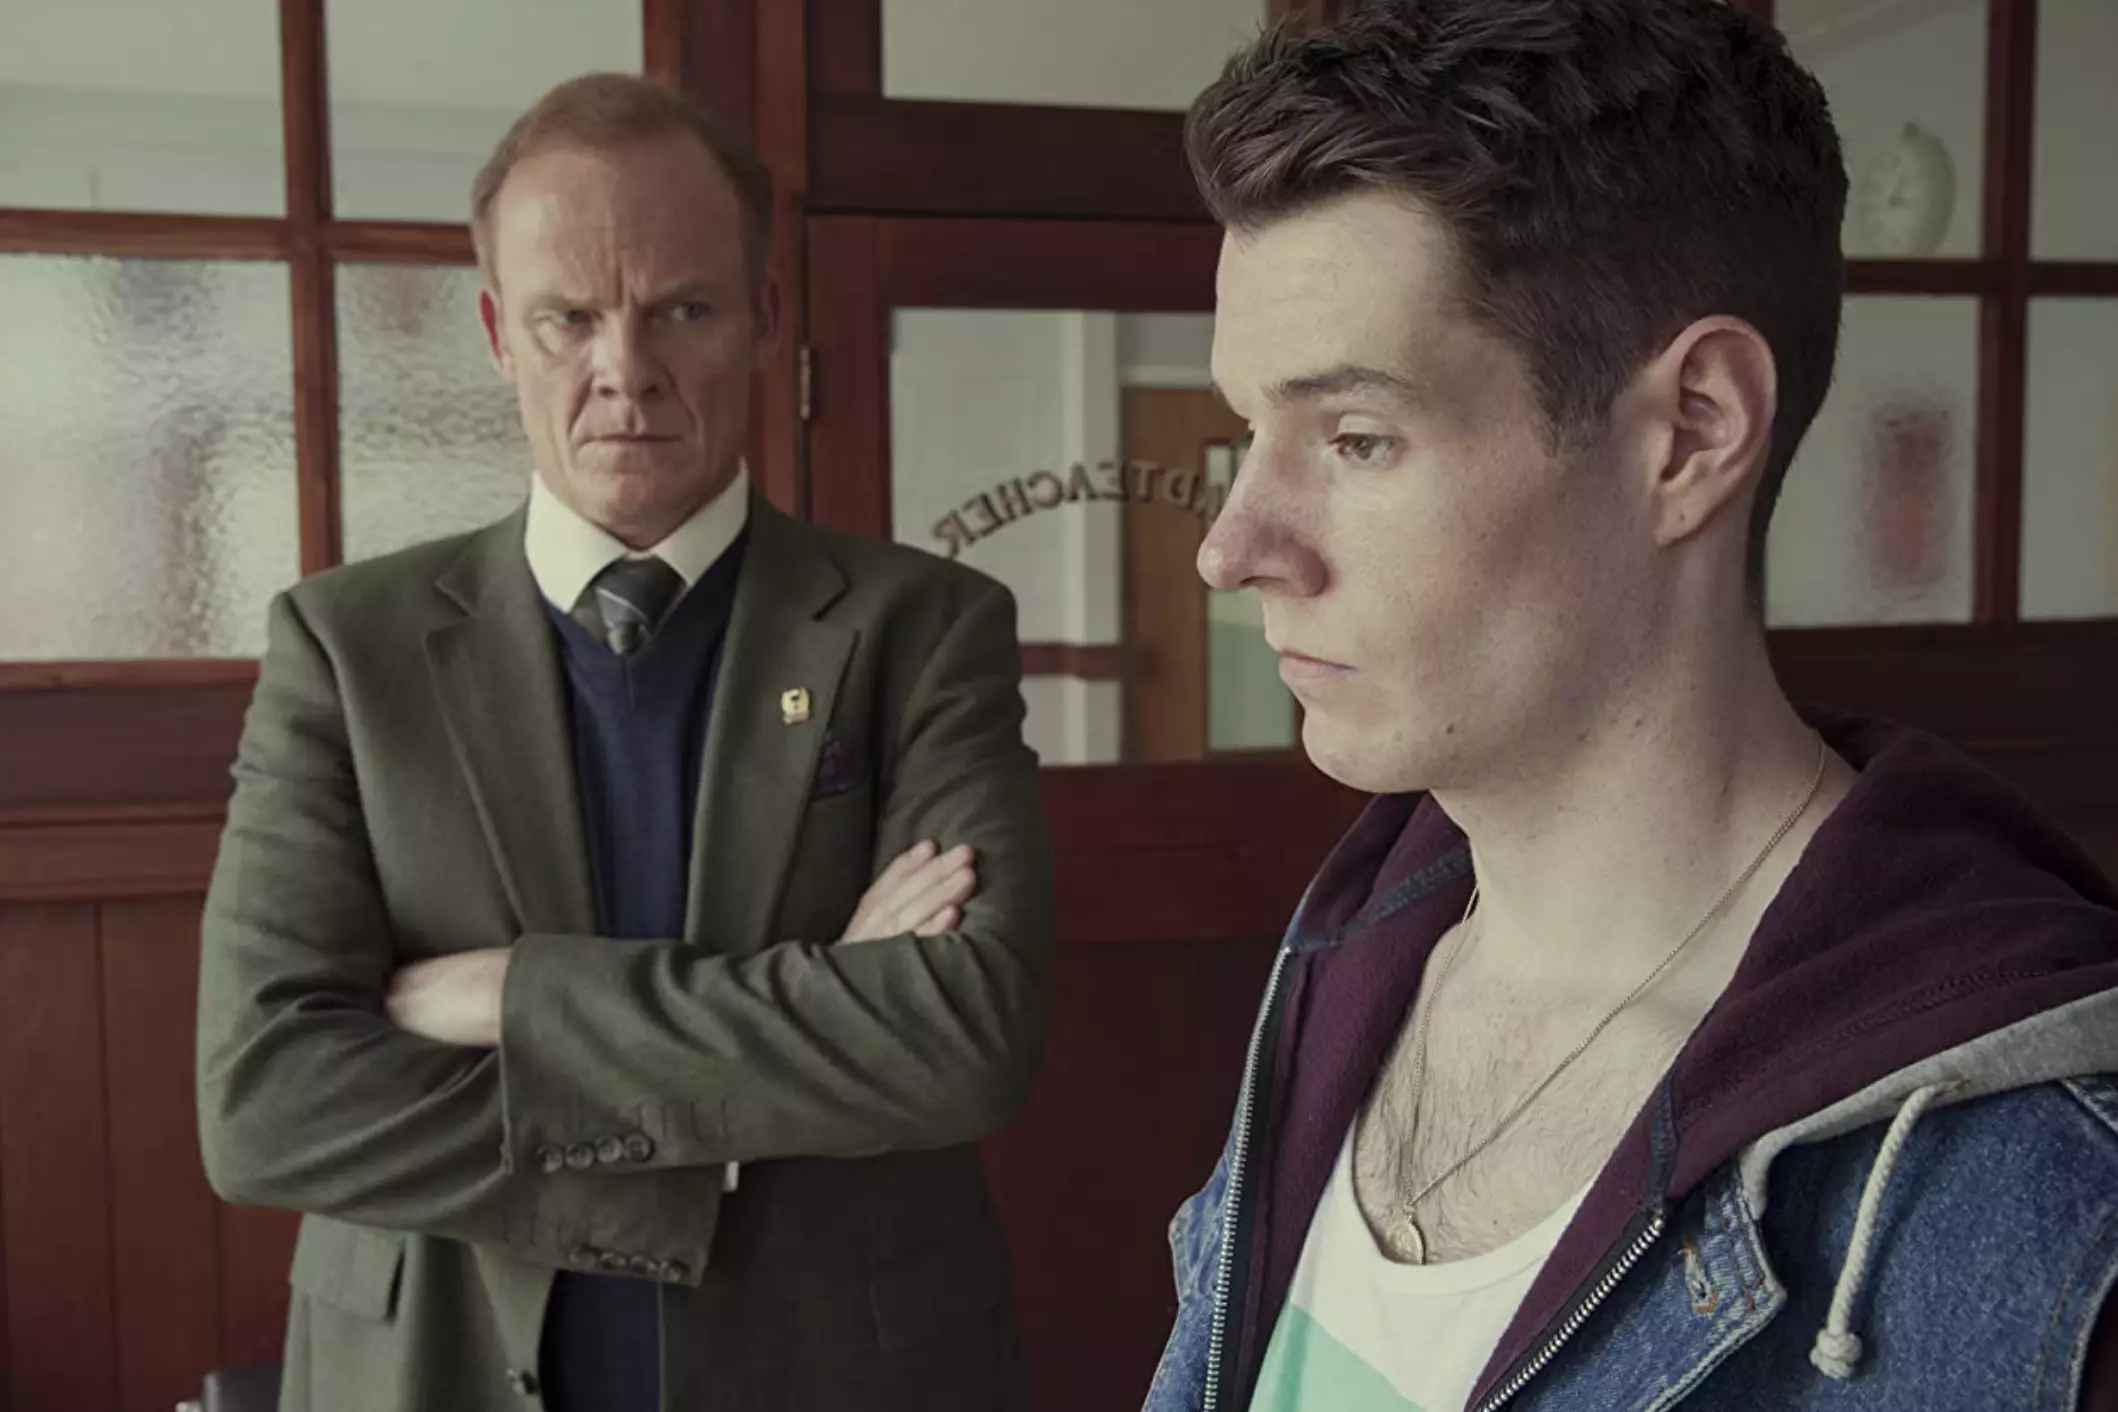 Connor Swindells and Alistair Petrie have been praised for their father-son chemistry on the show.